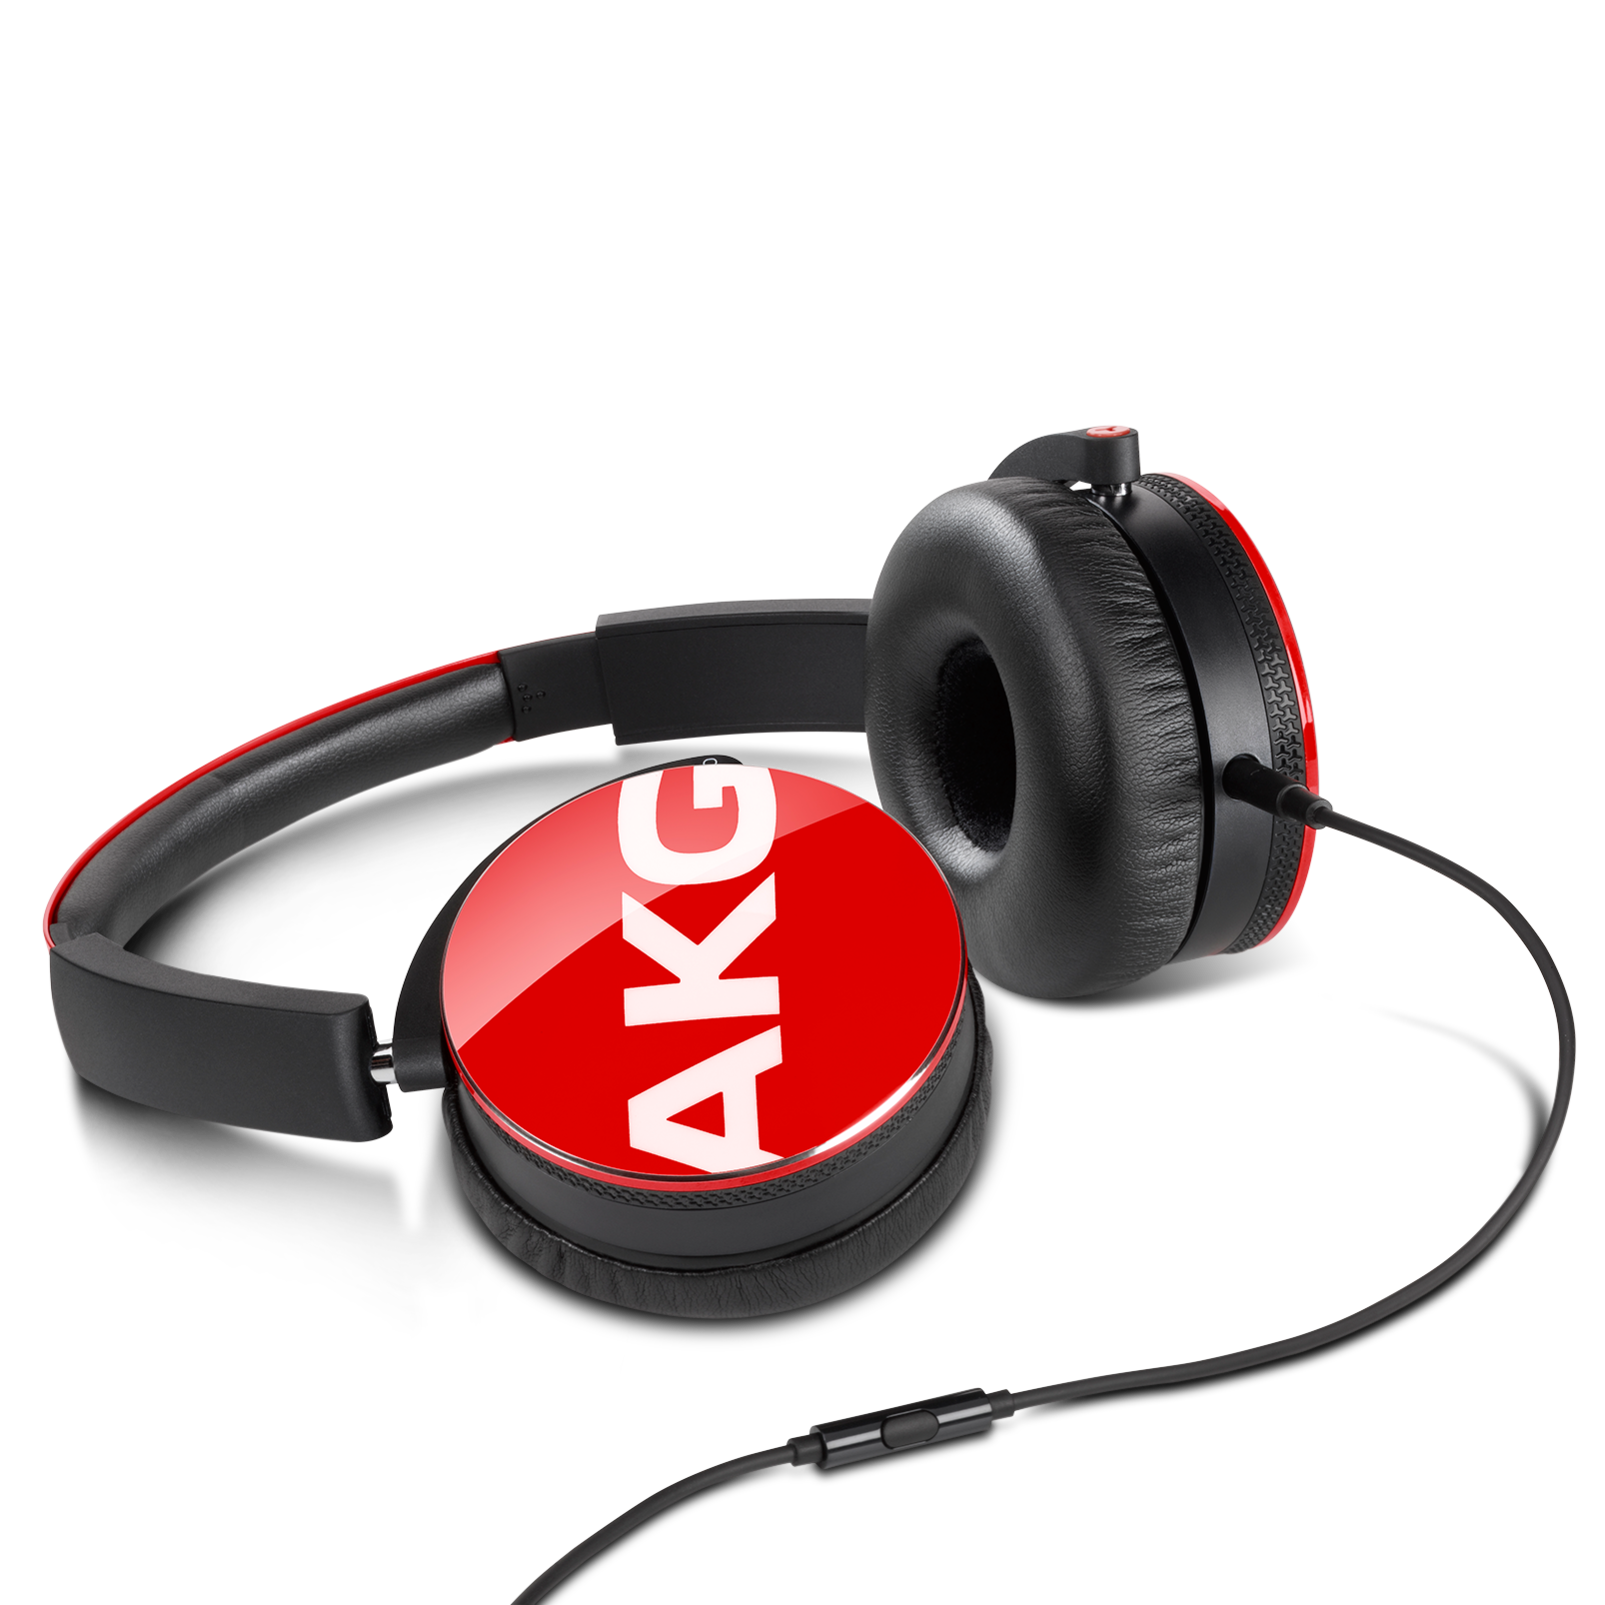 Y50 - Red - On-ear headphones with leyu-quality sound, smart styling, snug fit and detachable cable with in-line remote/mic - Detailshot 3